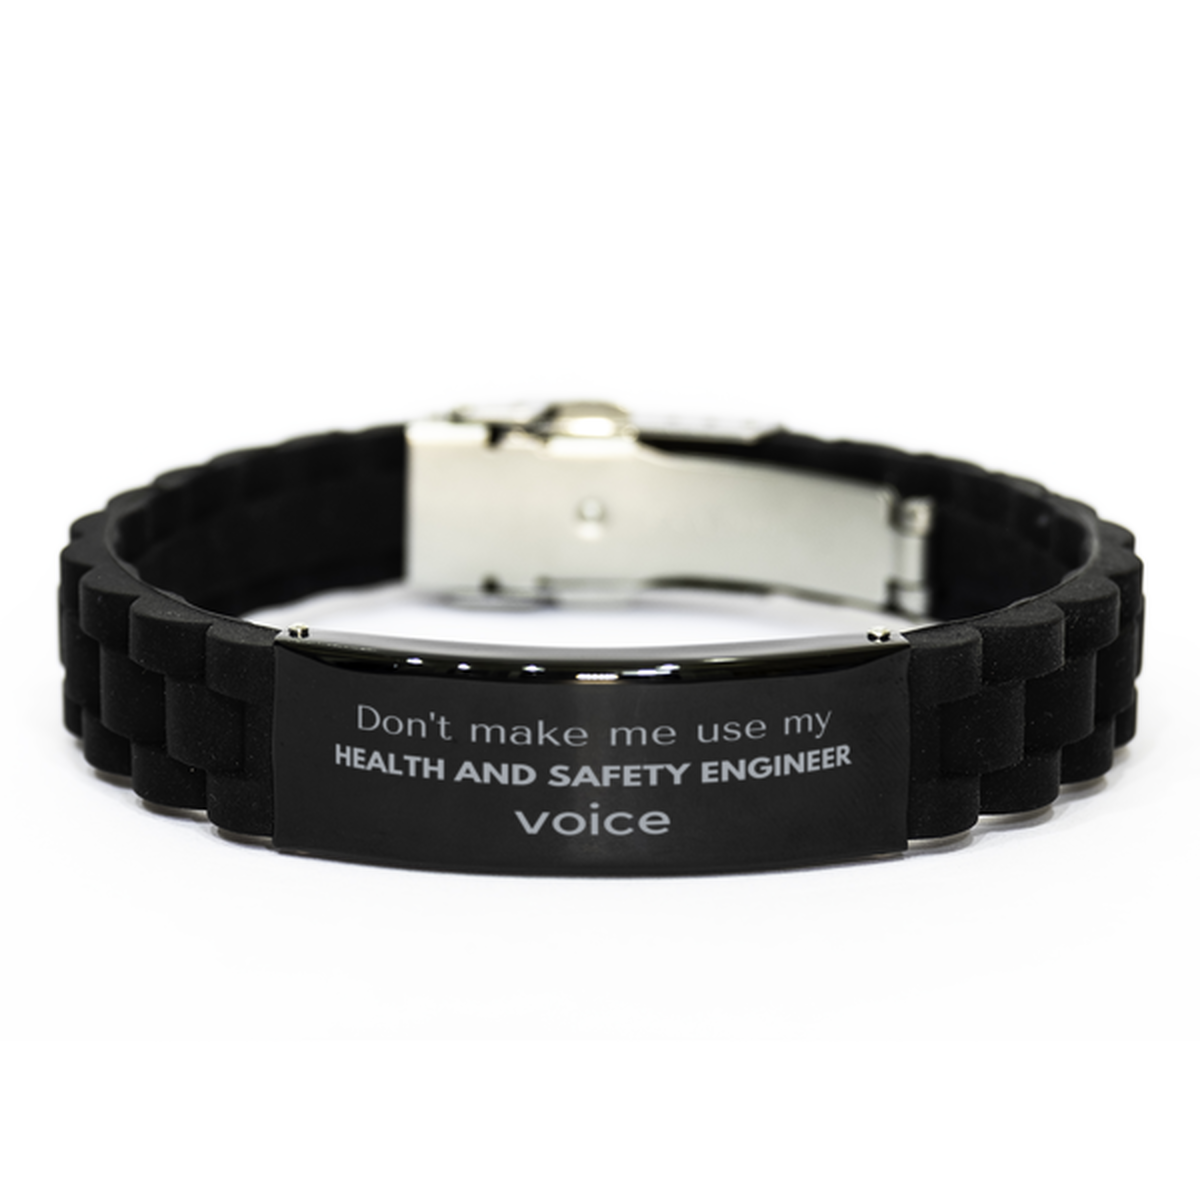 Don't make me use my Health and Safety Engineer voice, Sarcasm Health and Safety Engineer Gifts, Christmas Health and Safety Engineer Black Glidelock Clasp Bracelet Birthday Unique Gifts For Health and Safety Engineer Coworkers, Men, Women, Colleague, Fri